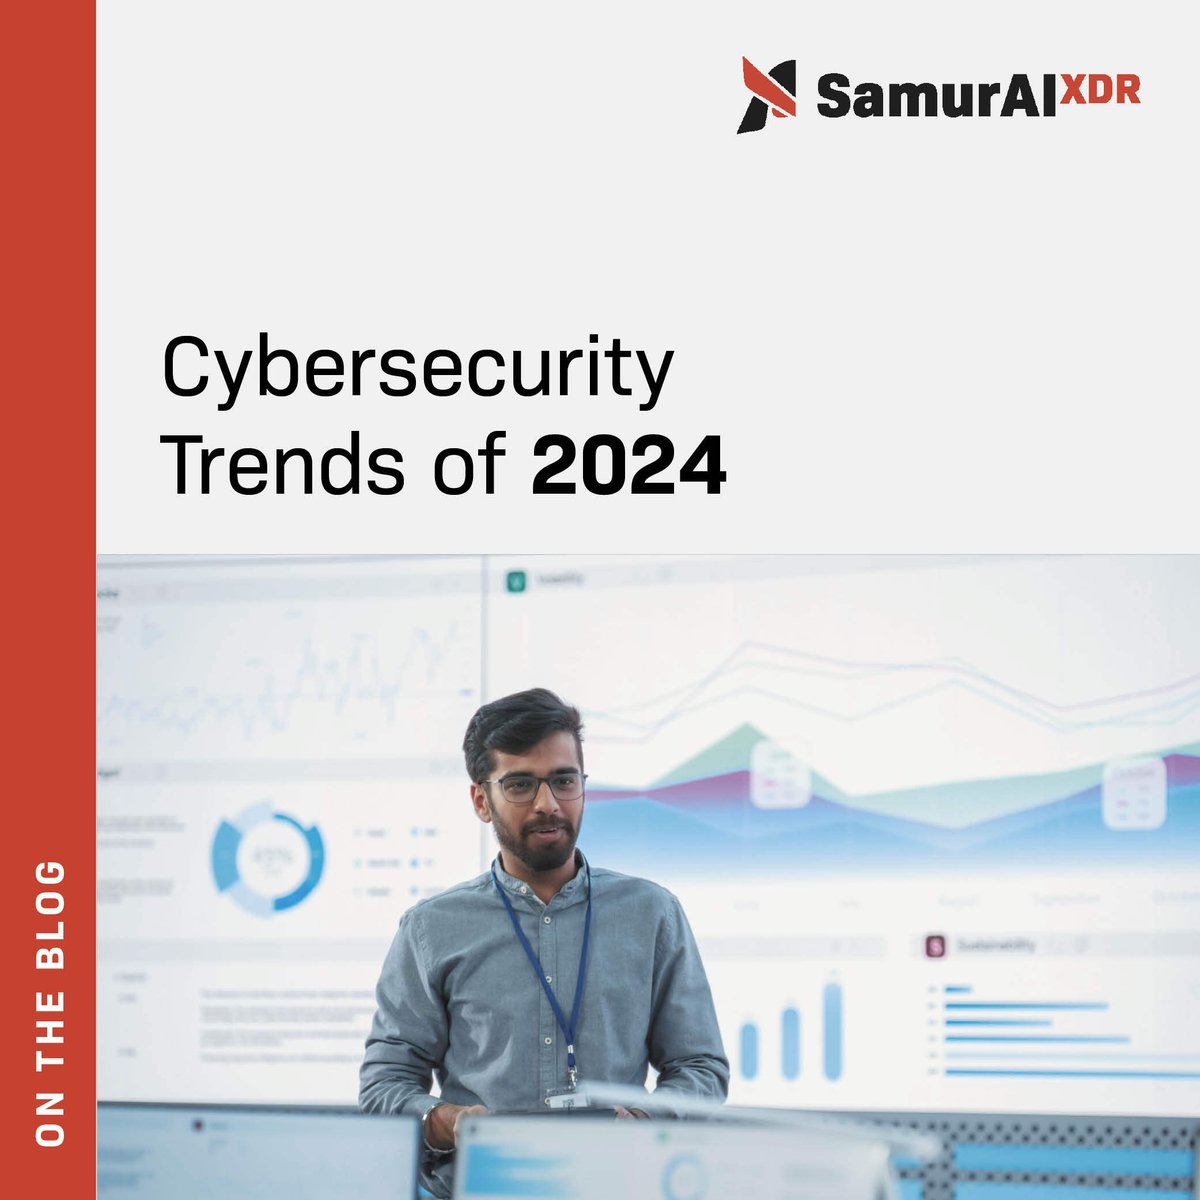 Cybersecurity threats are evolving rapidly. Ransomware, phishing, AI technology, and nation states are all major concerns. Small and medium-sized need to stay vigilant. Read more on our blog: eu1.hubs.ly/H08Y9Fv0

#ProtectYourBusiness #AdvancedTech #CyberSecurity